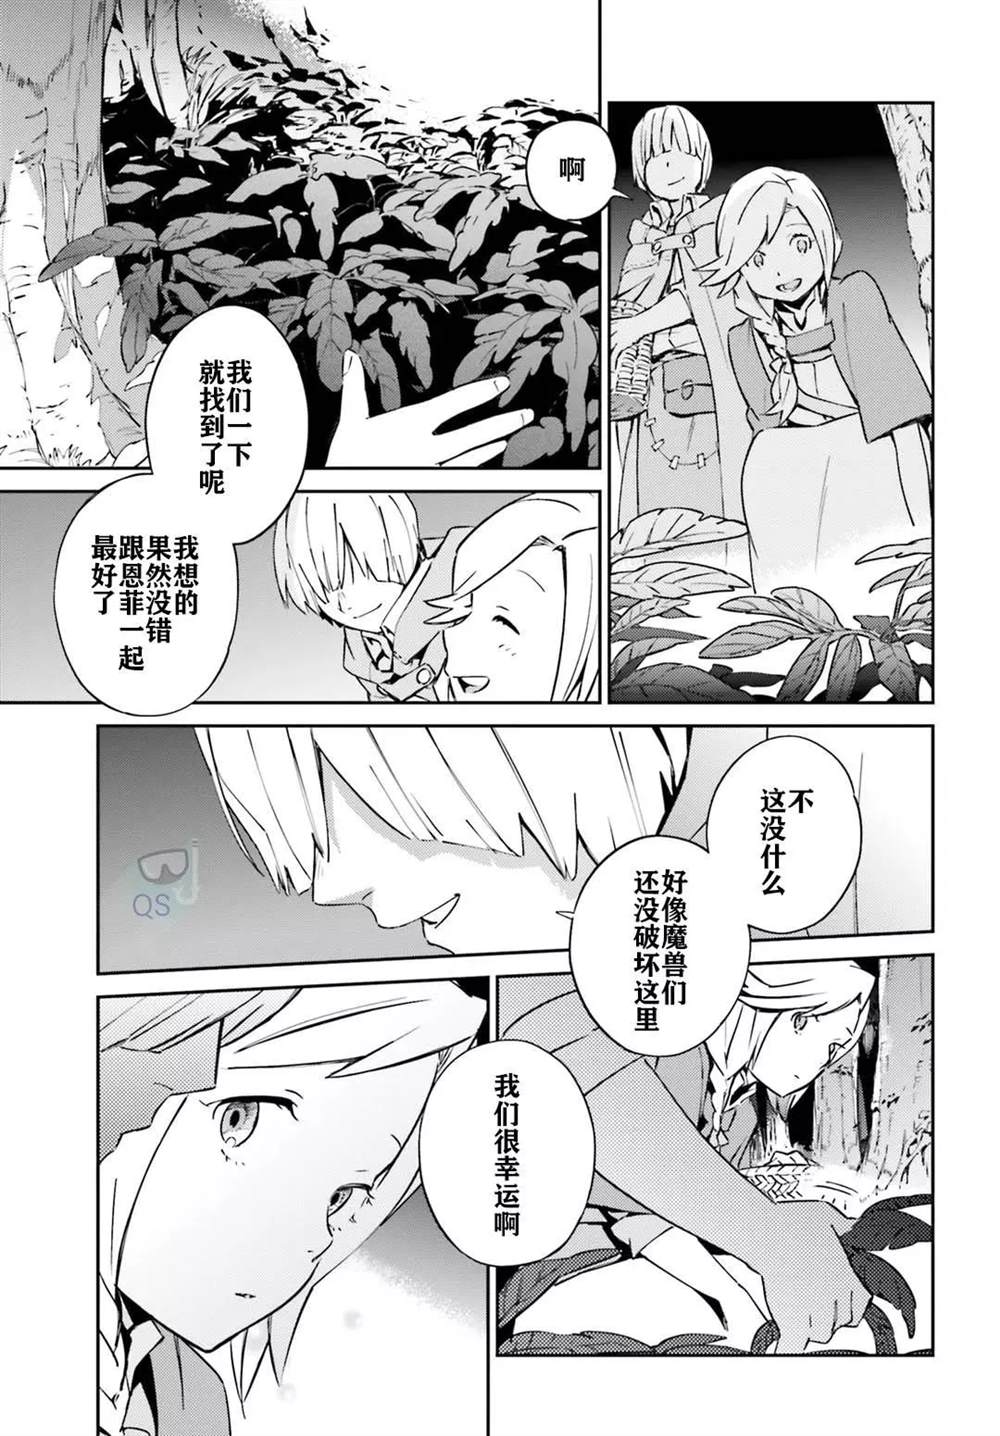 OVERLORD - 第54話 - 3